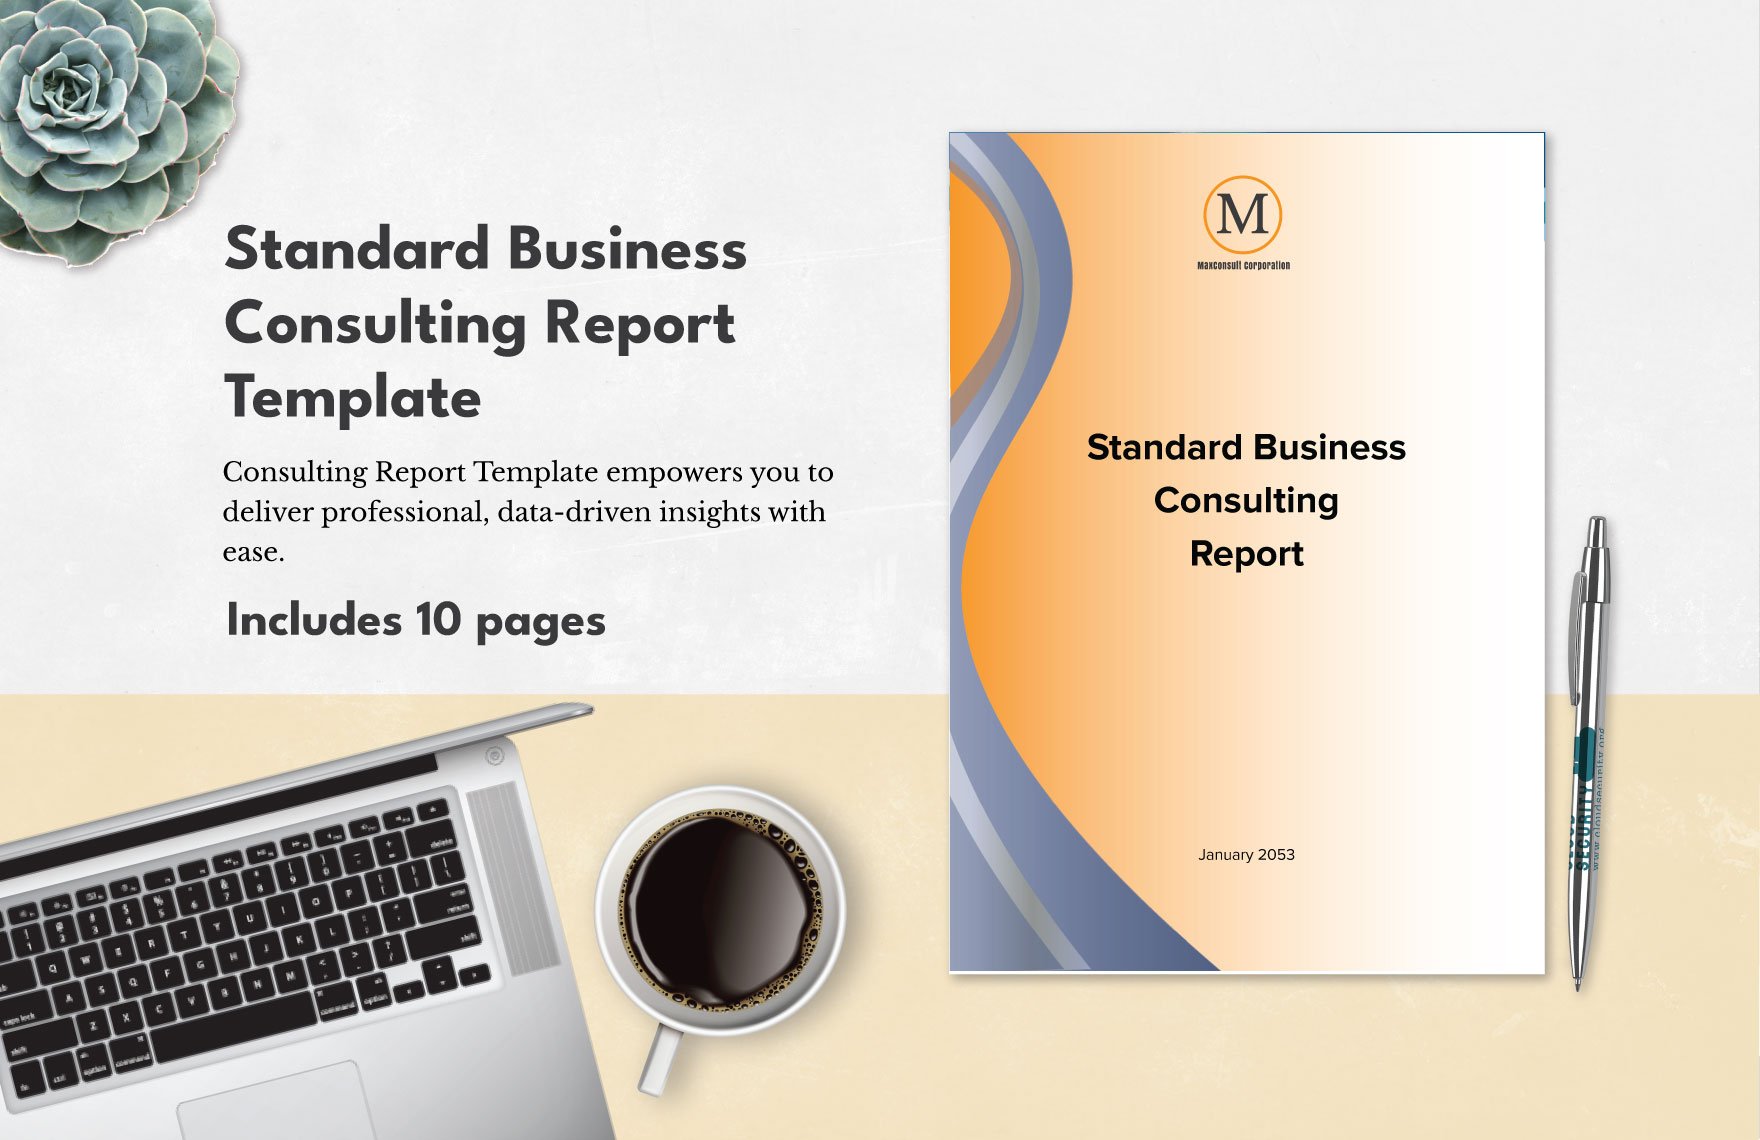 Standard Business Consulting Report Template